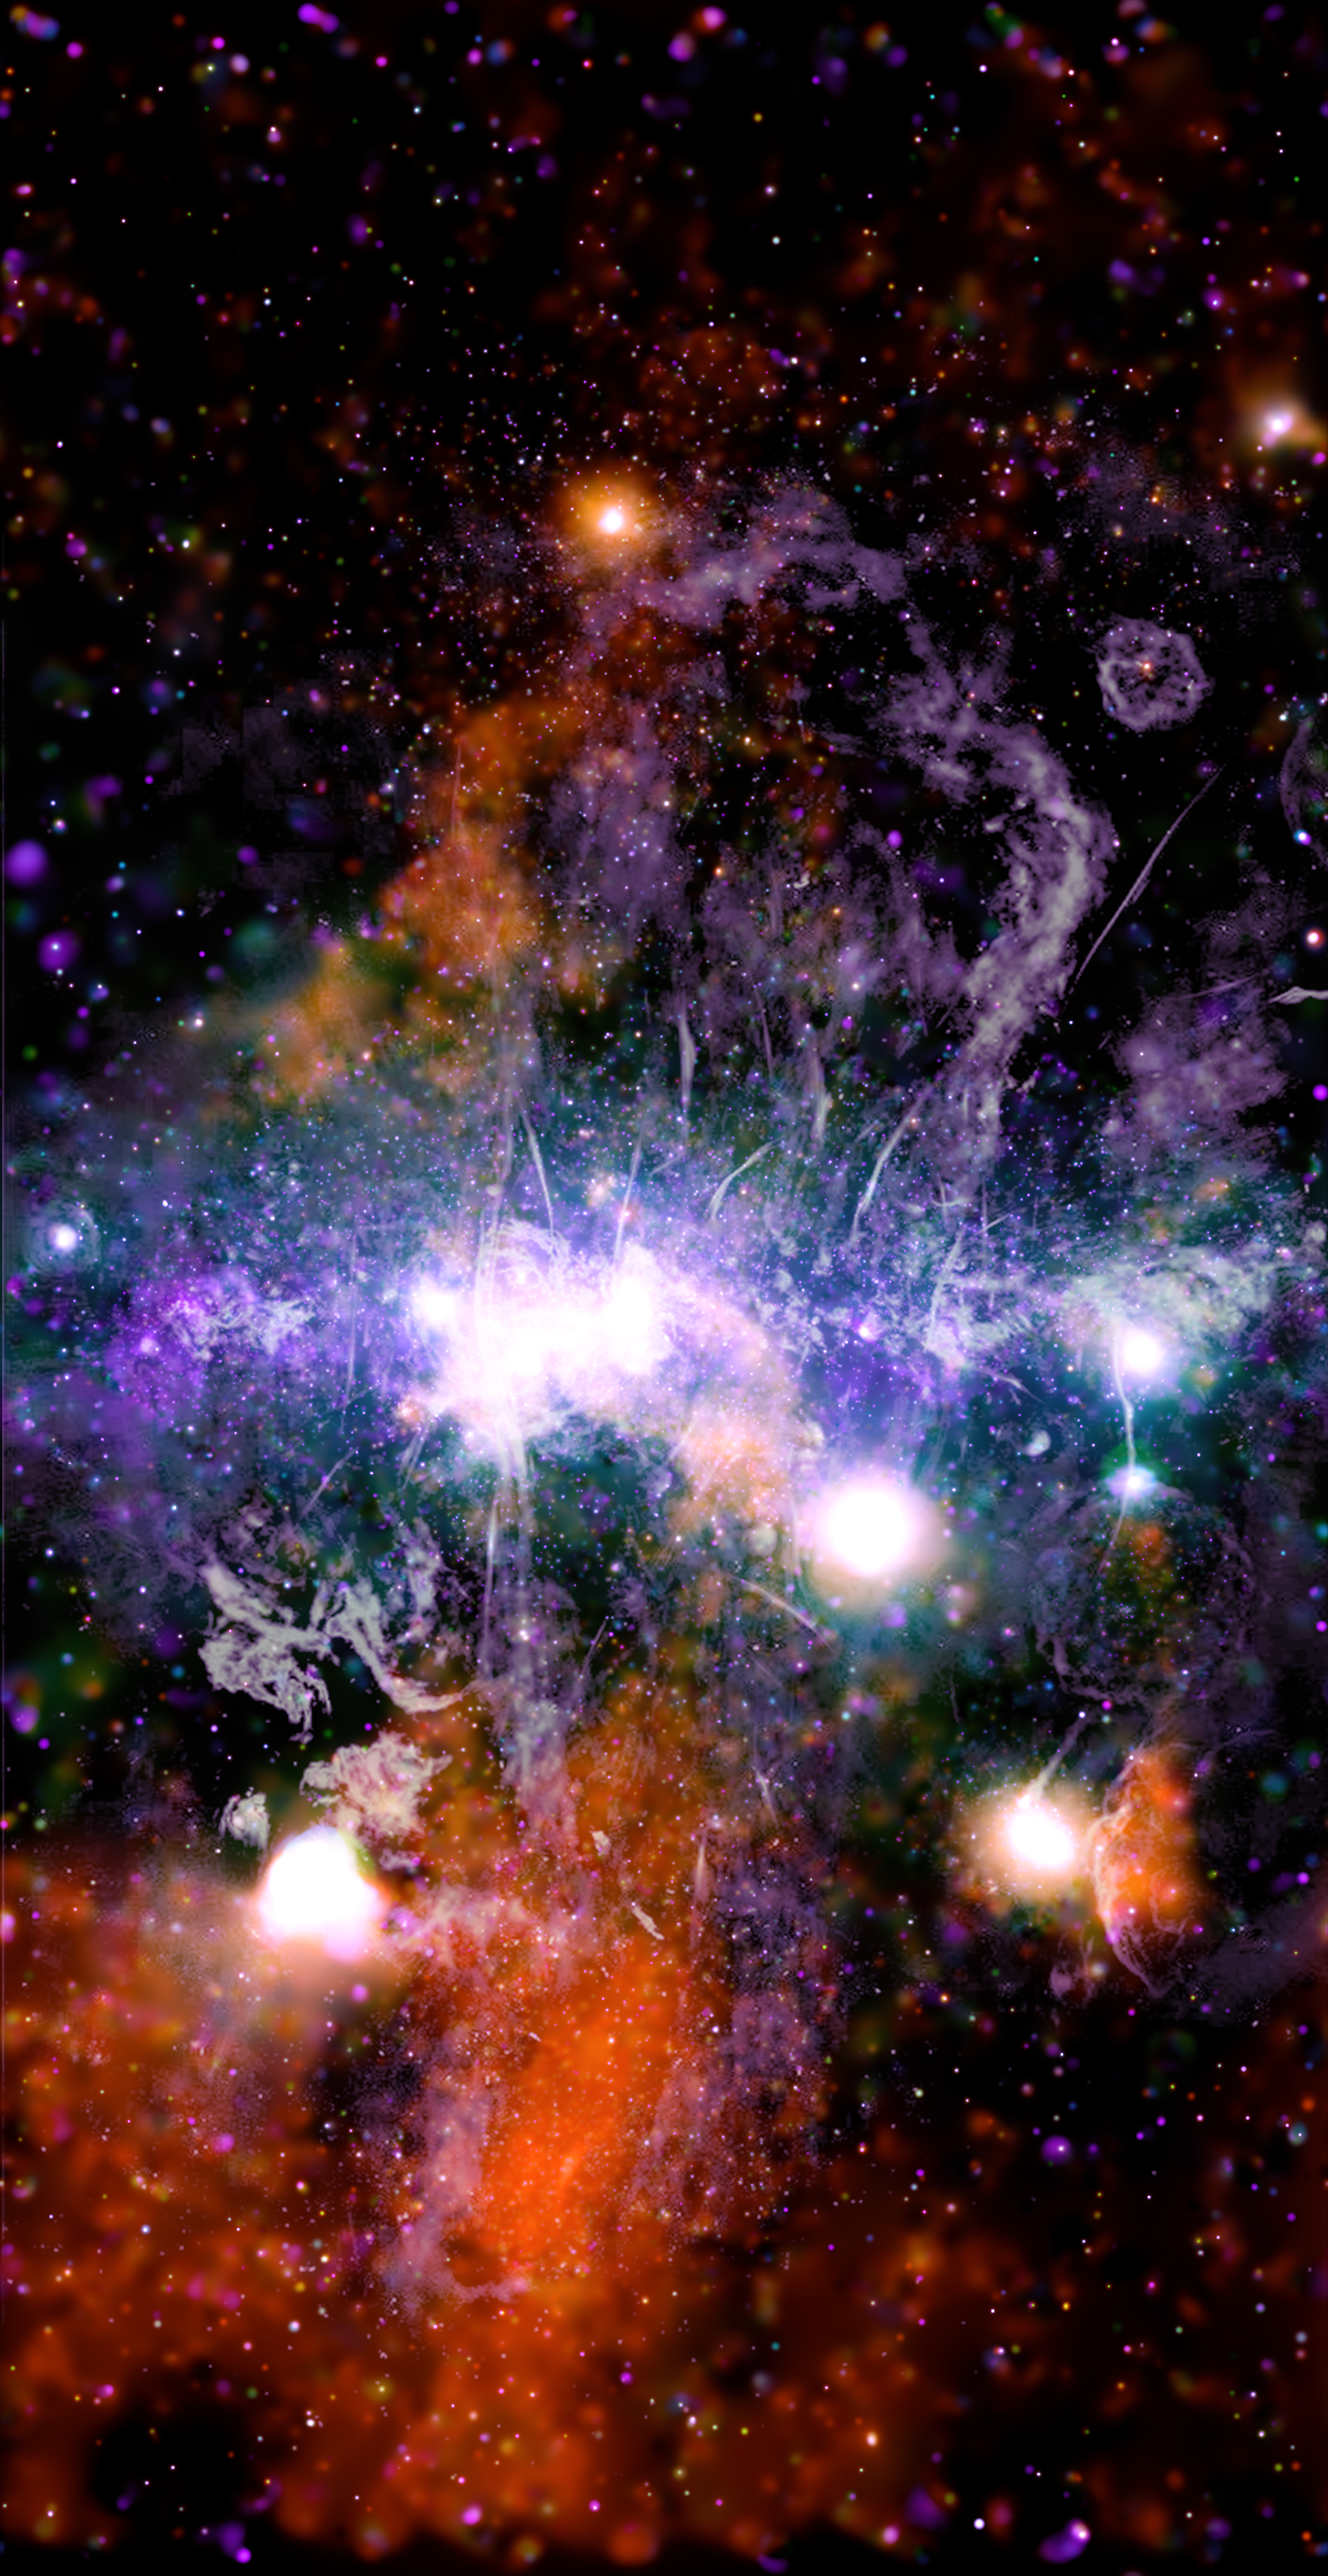 Galactic Center Panorama in X-ray and Radio